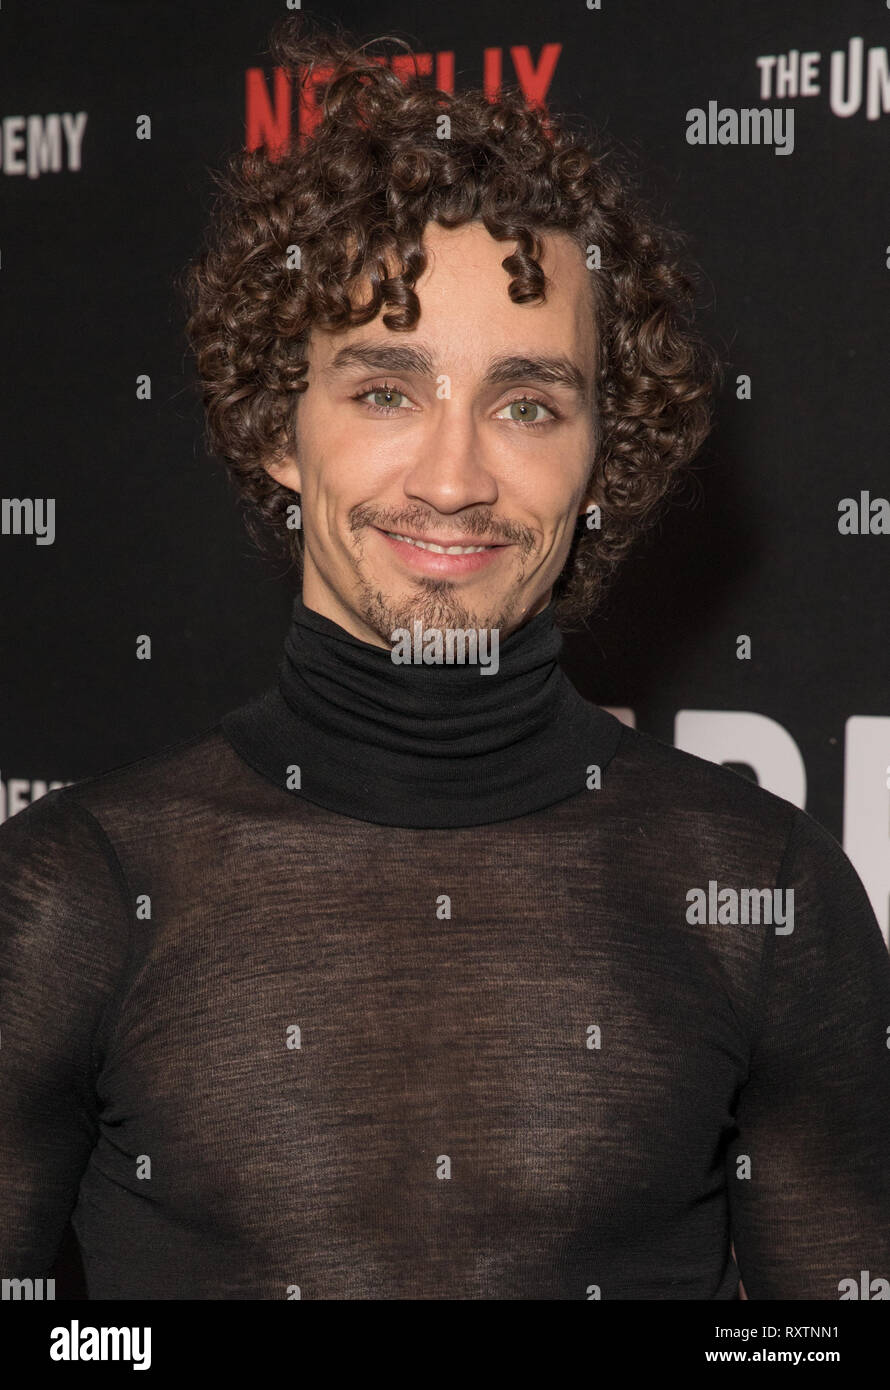 Cast attend photocall for forthcoming Netflix series 'The Umbrella Academy'  Featuring: Robert Sheehan Where: London, United Kingdom When: 07 Feb 2019  Credit: Phil Lewis/WENN.com Stock Photo - Alamy